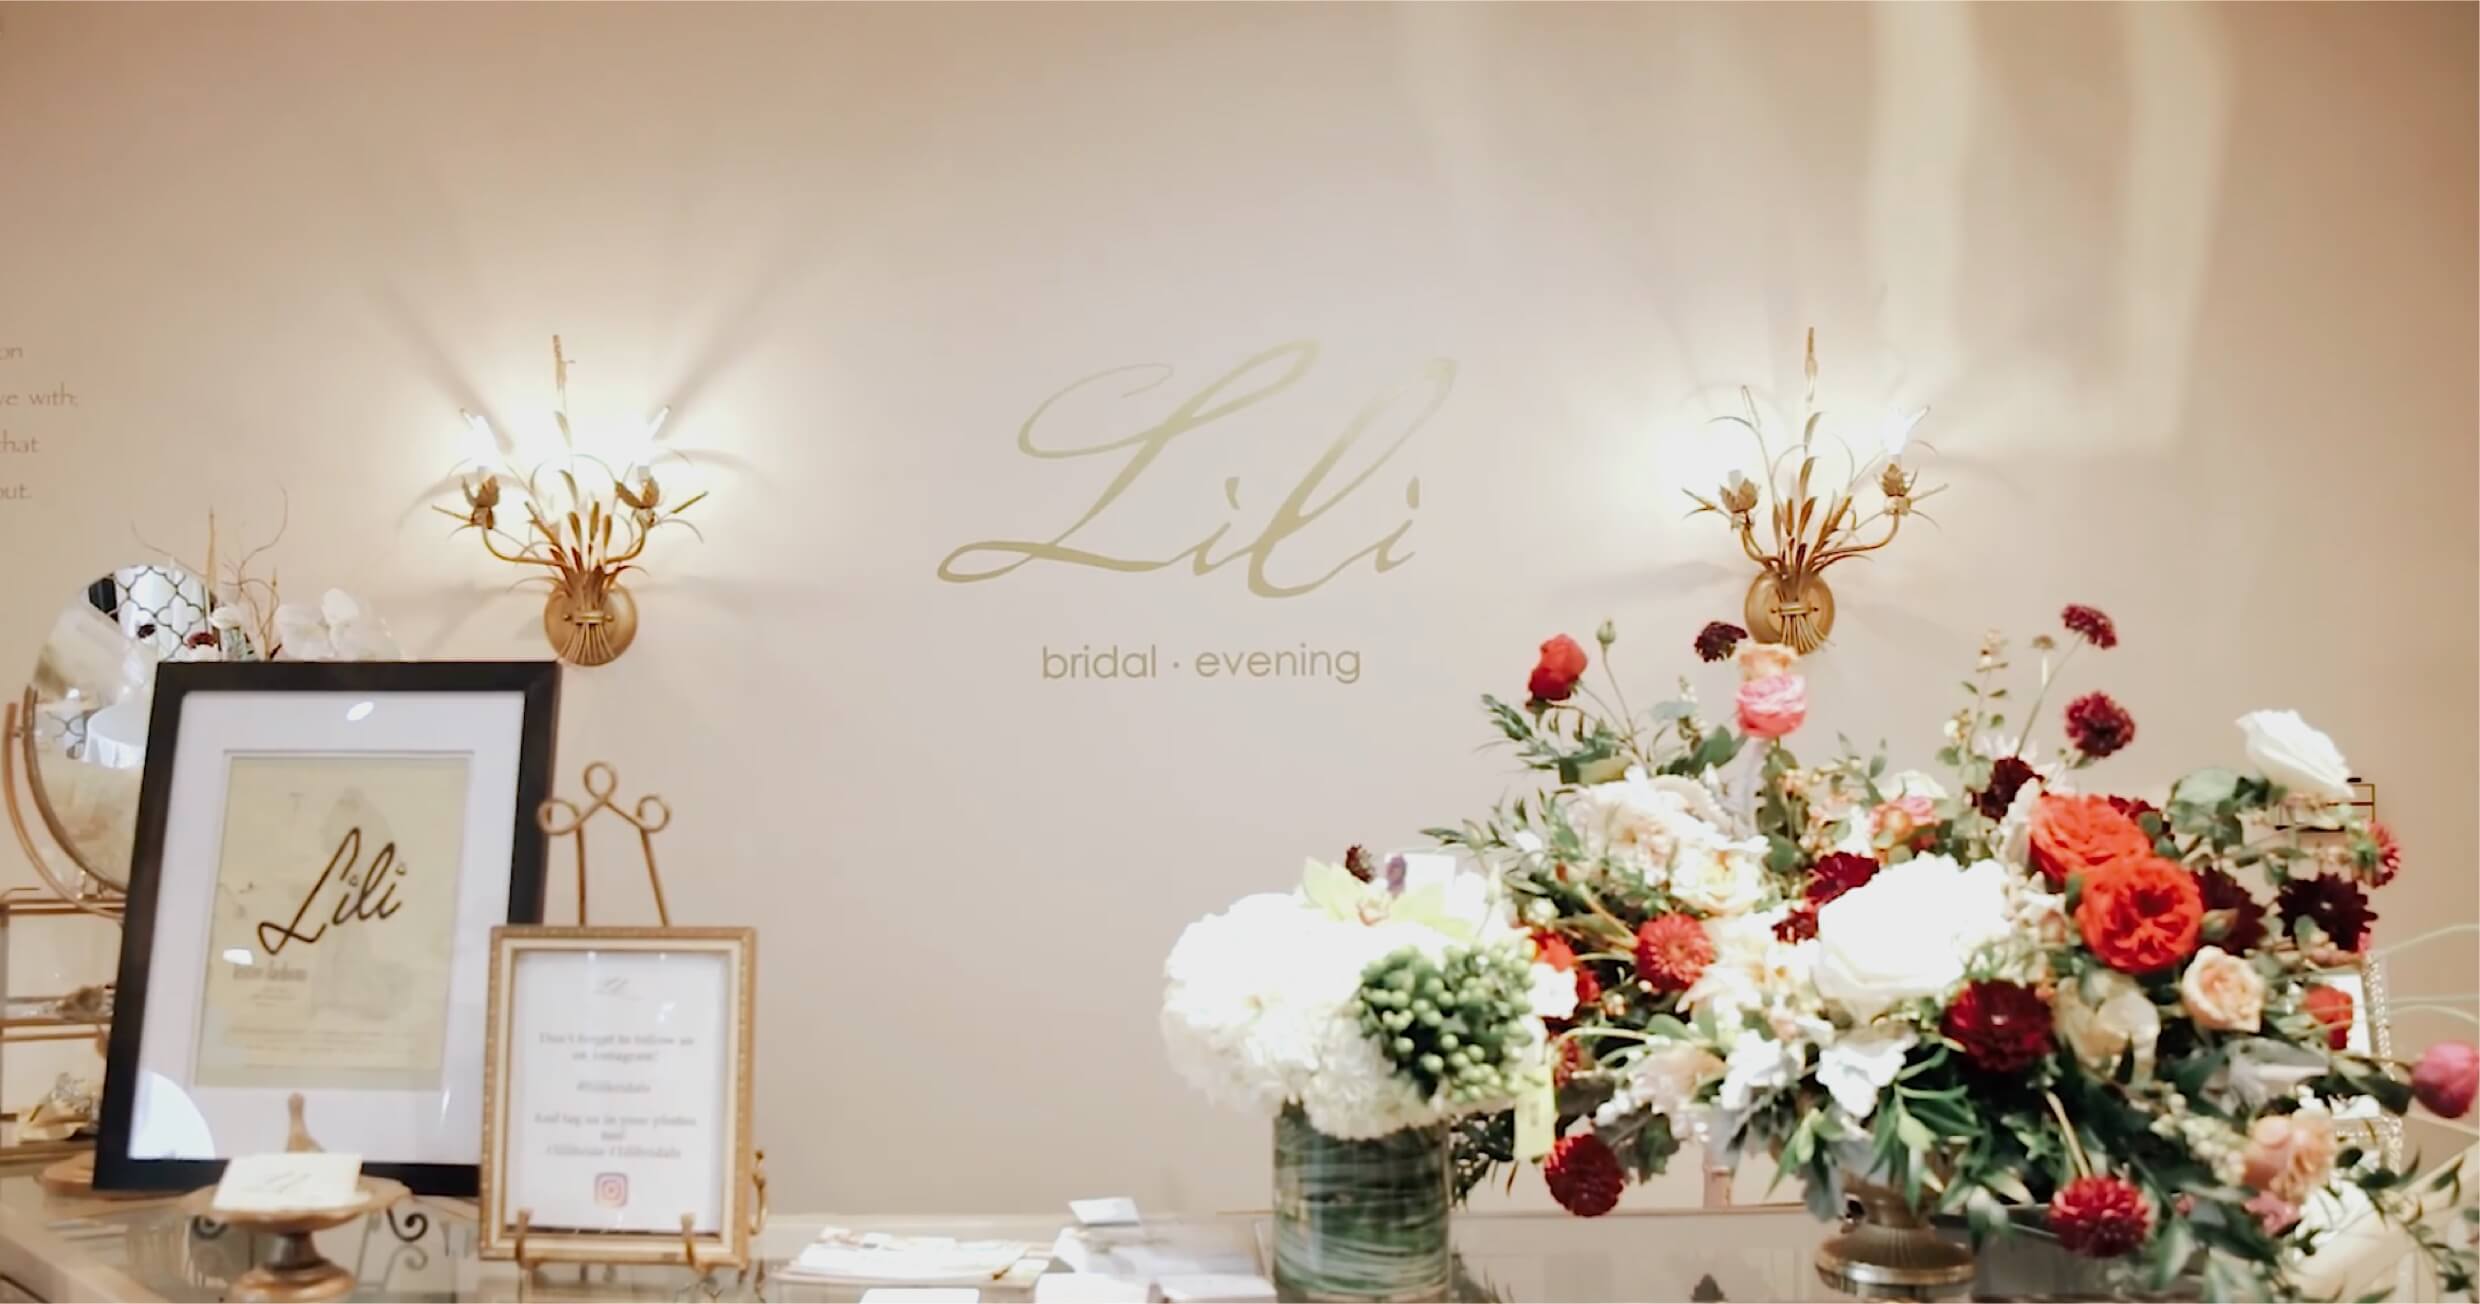 Entrance Into Lili Bridal Store With Logo On Wall.